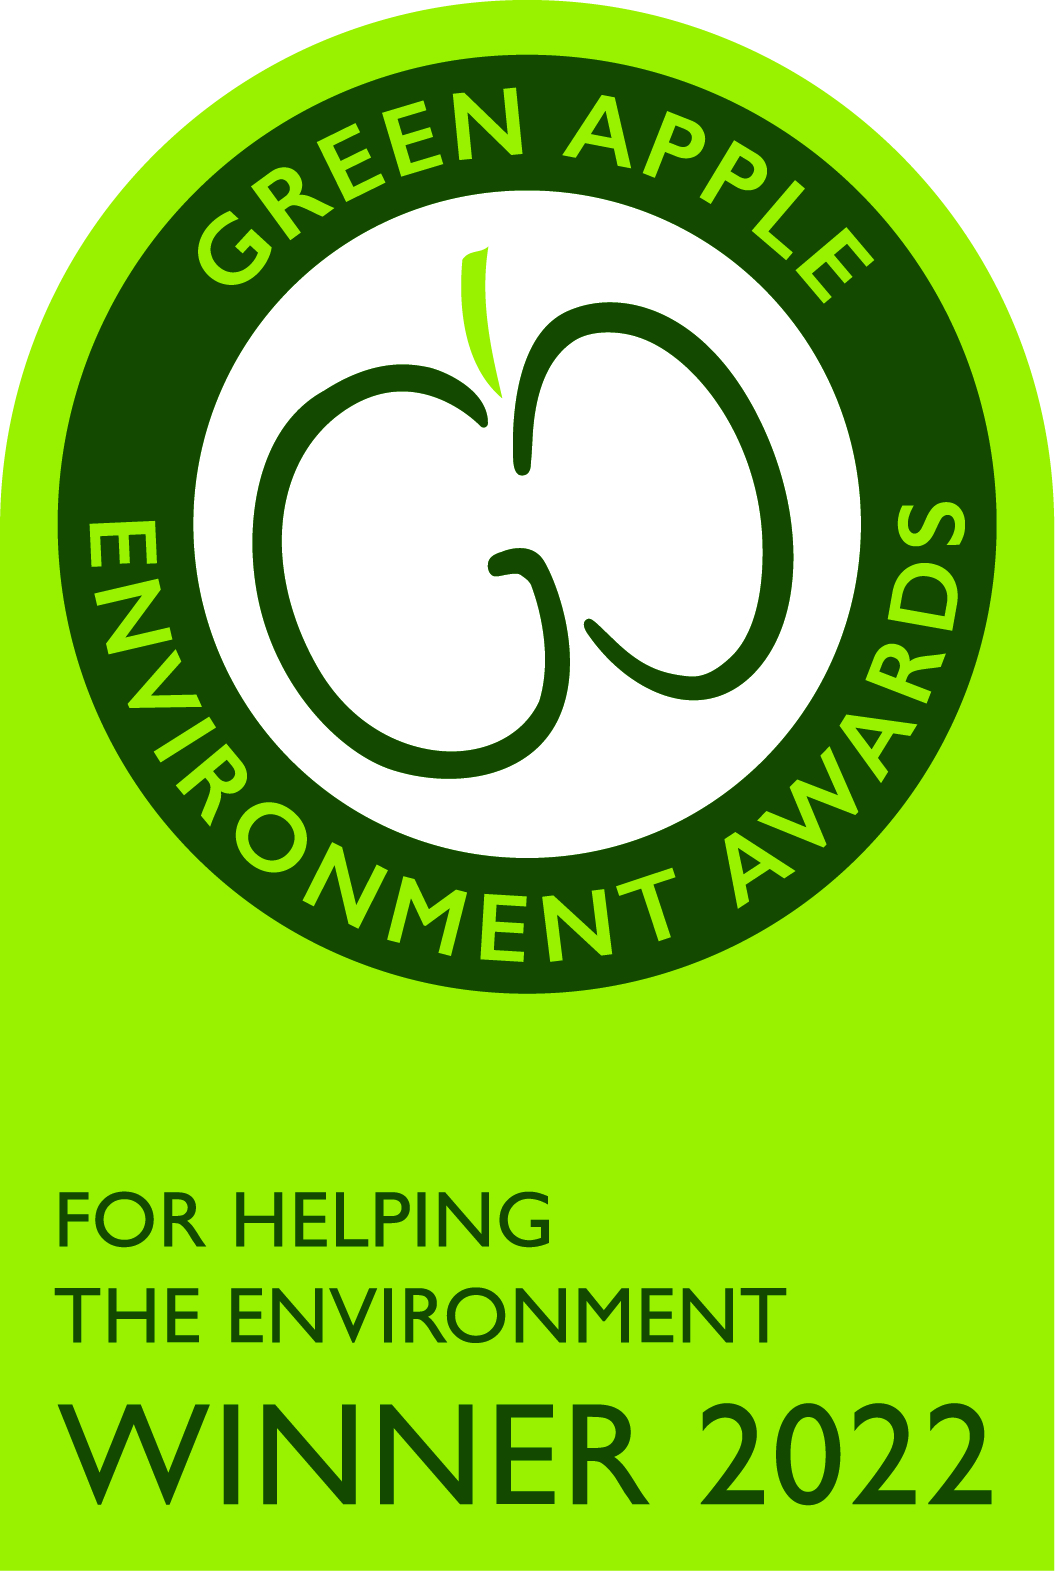 We Have Received An International Green Apple Award The Tootal Buildings